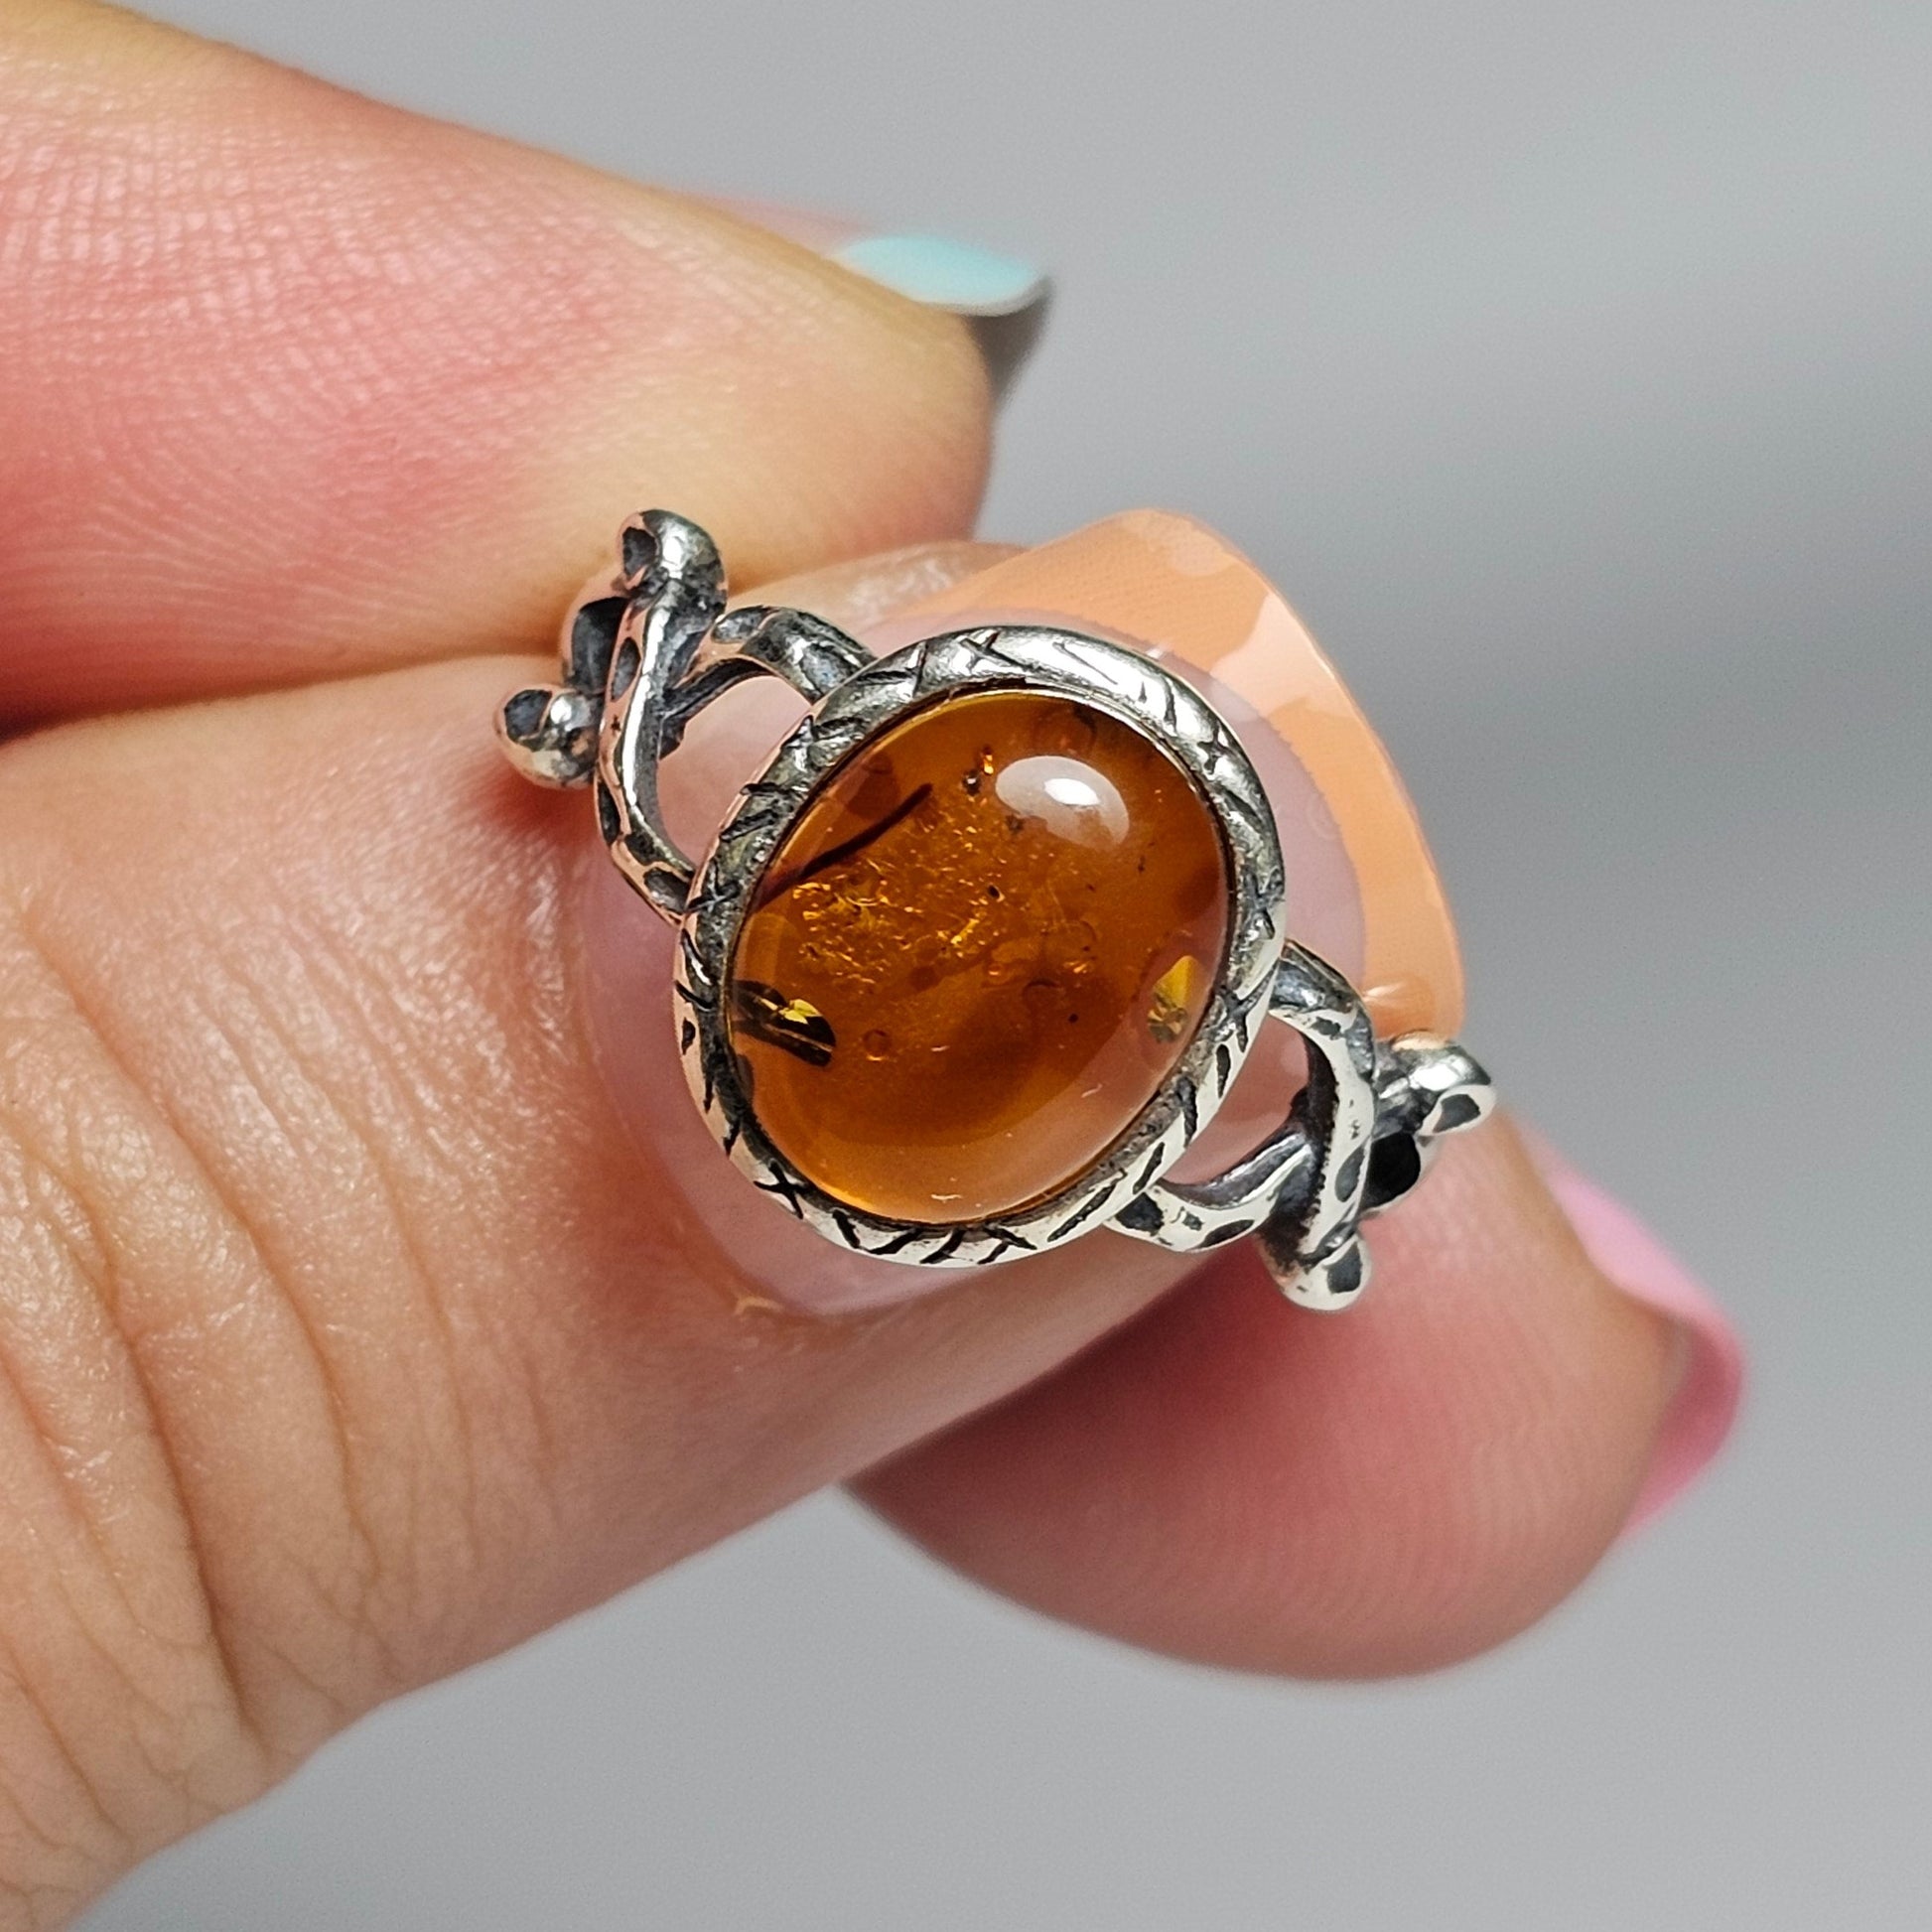 This adjustable ring is crafted from sterling silver and features a beautiful oval shaped Amber stone with a textured bezel and criss-cross designed shoulders.